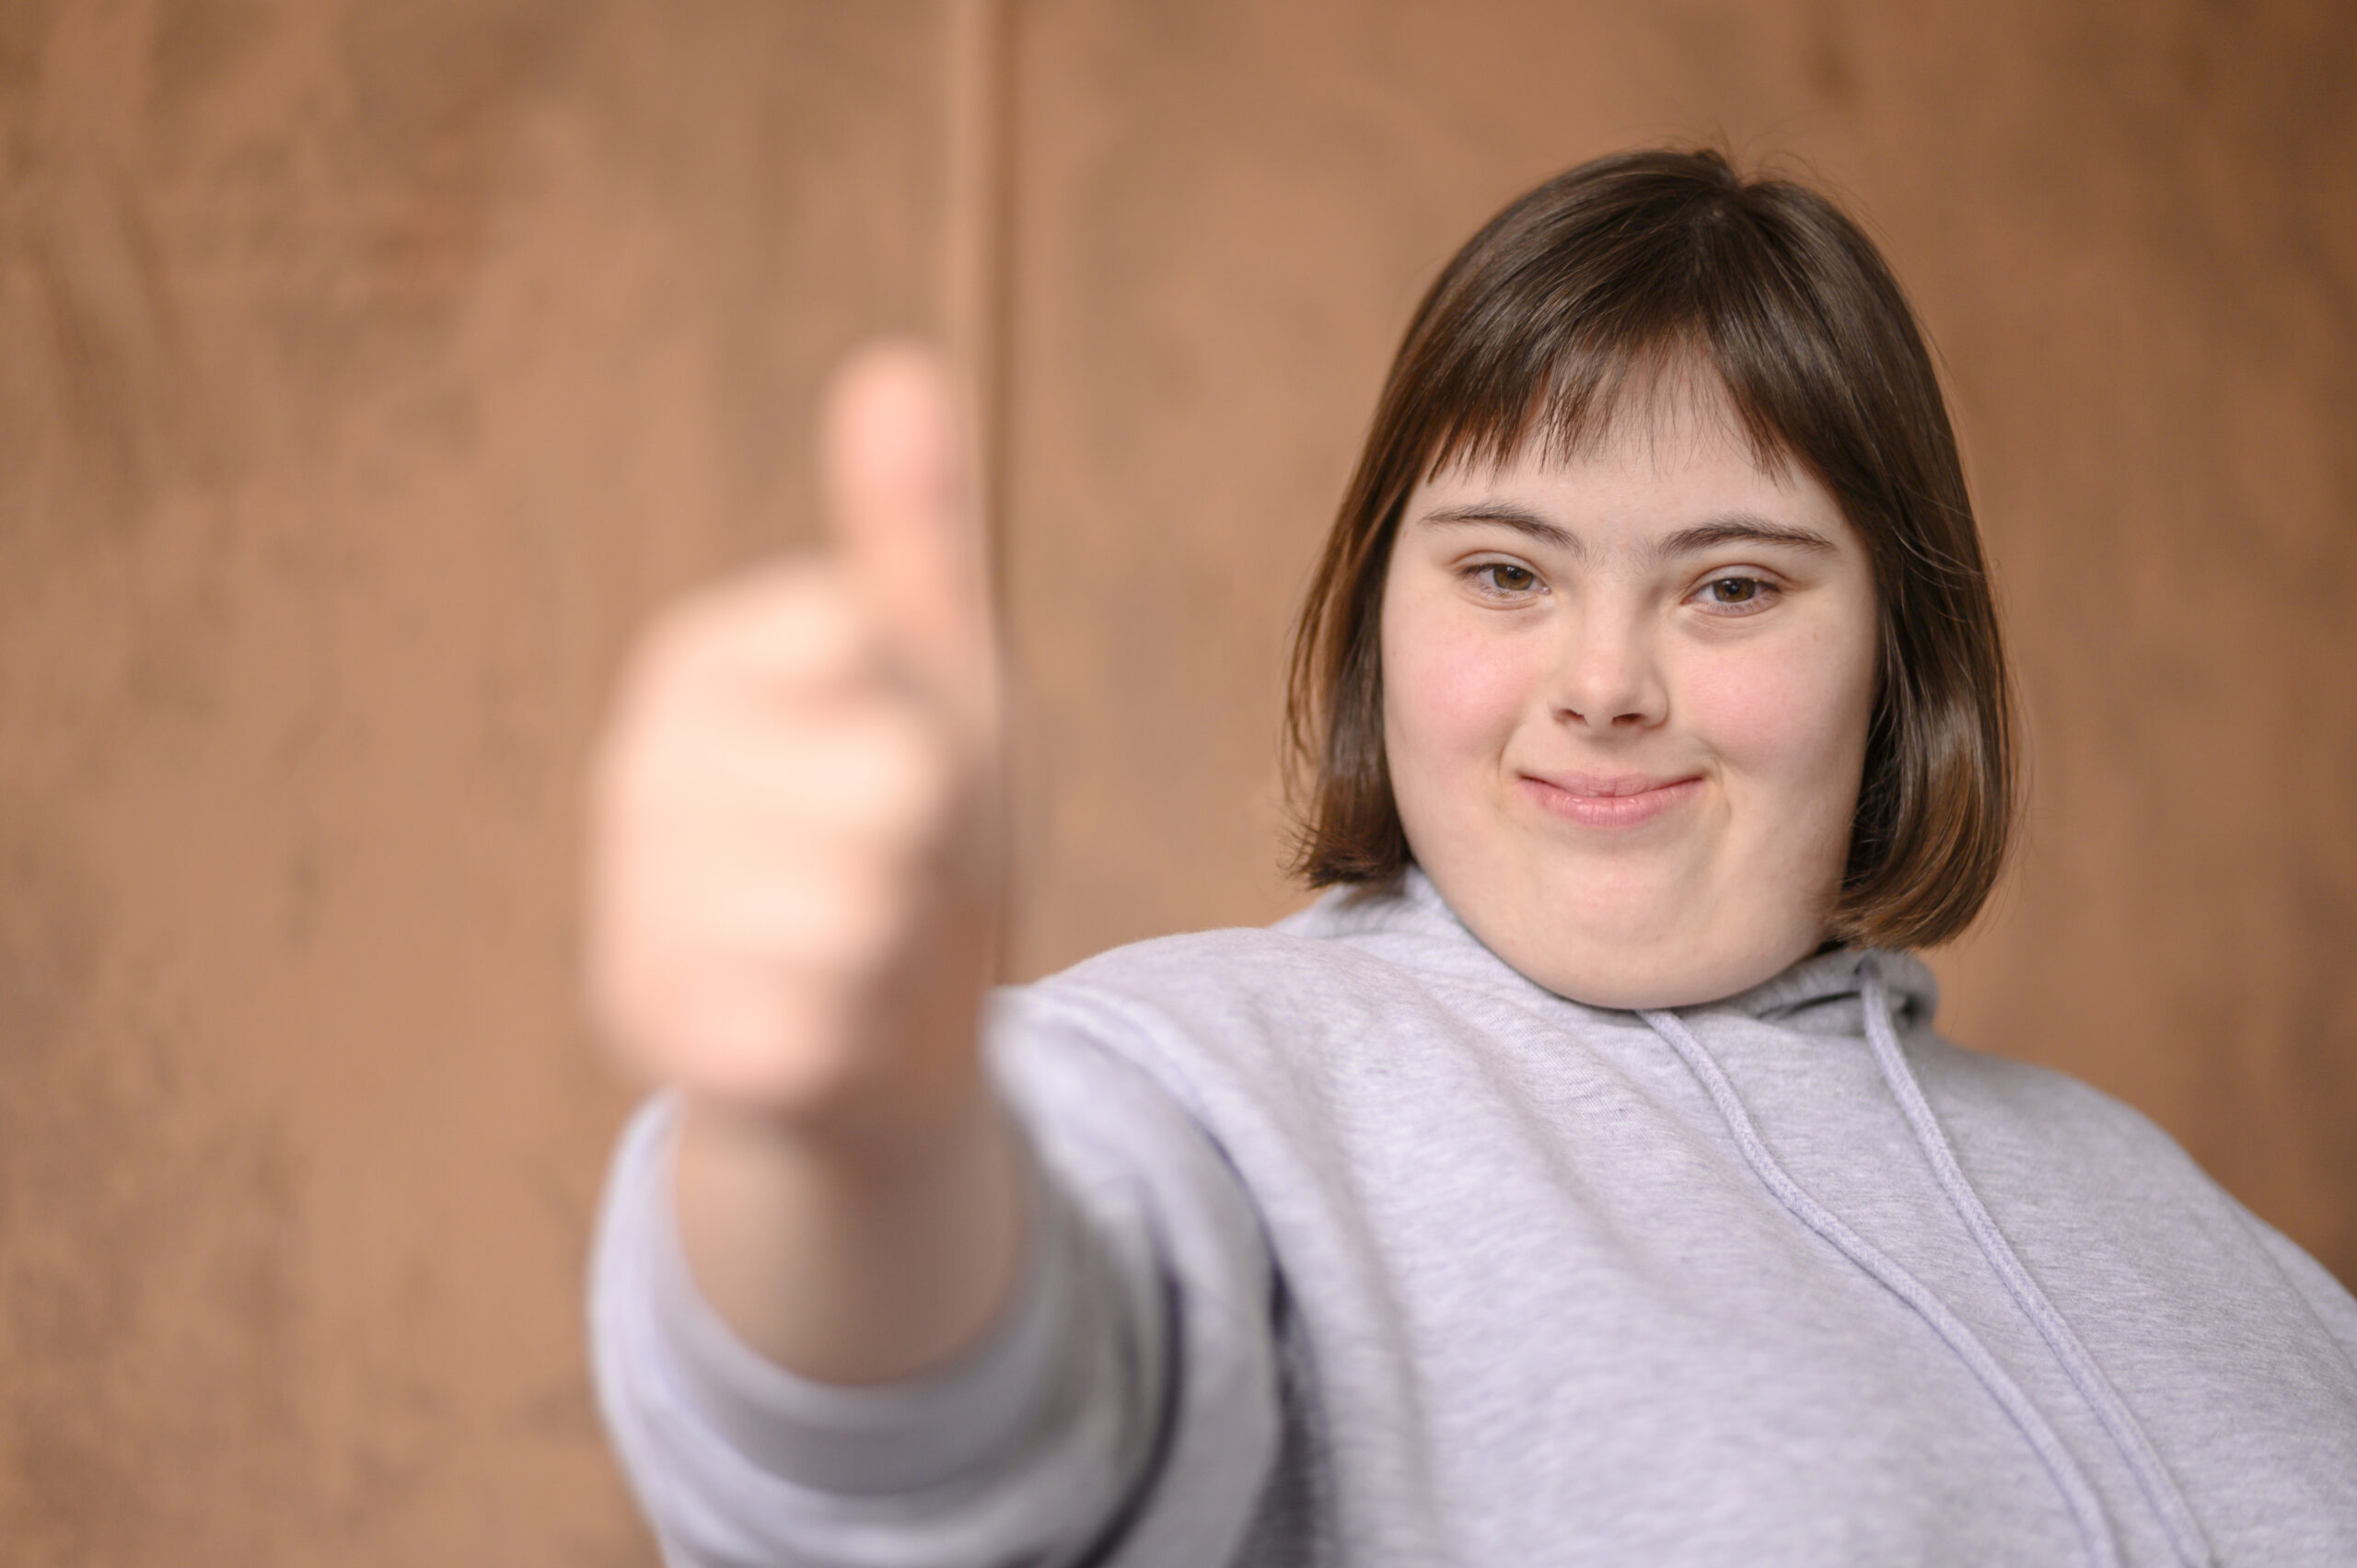 Down Syndrome: Causes, Characteristics, and Medical Care